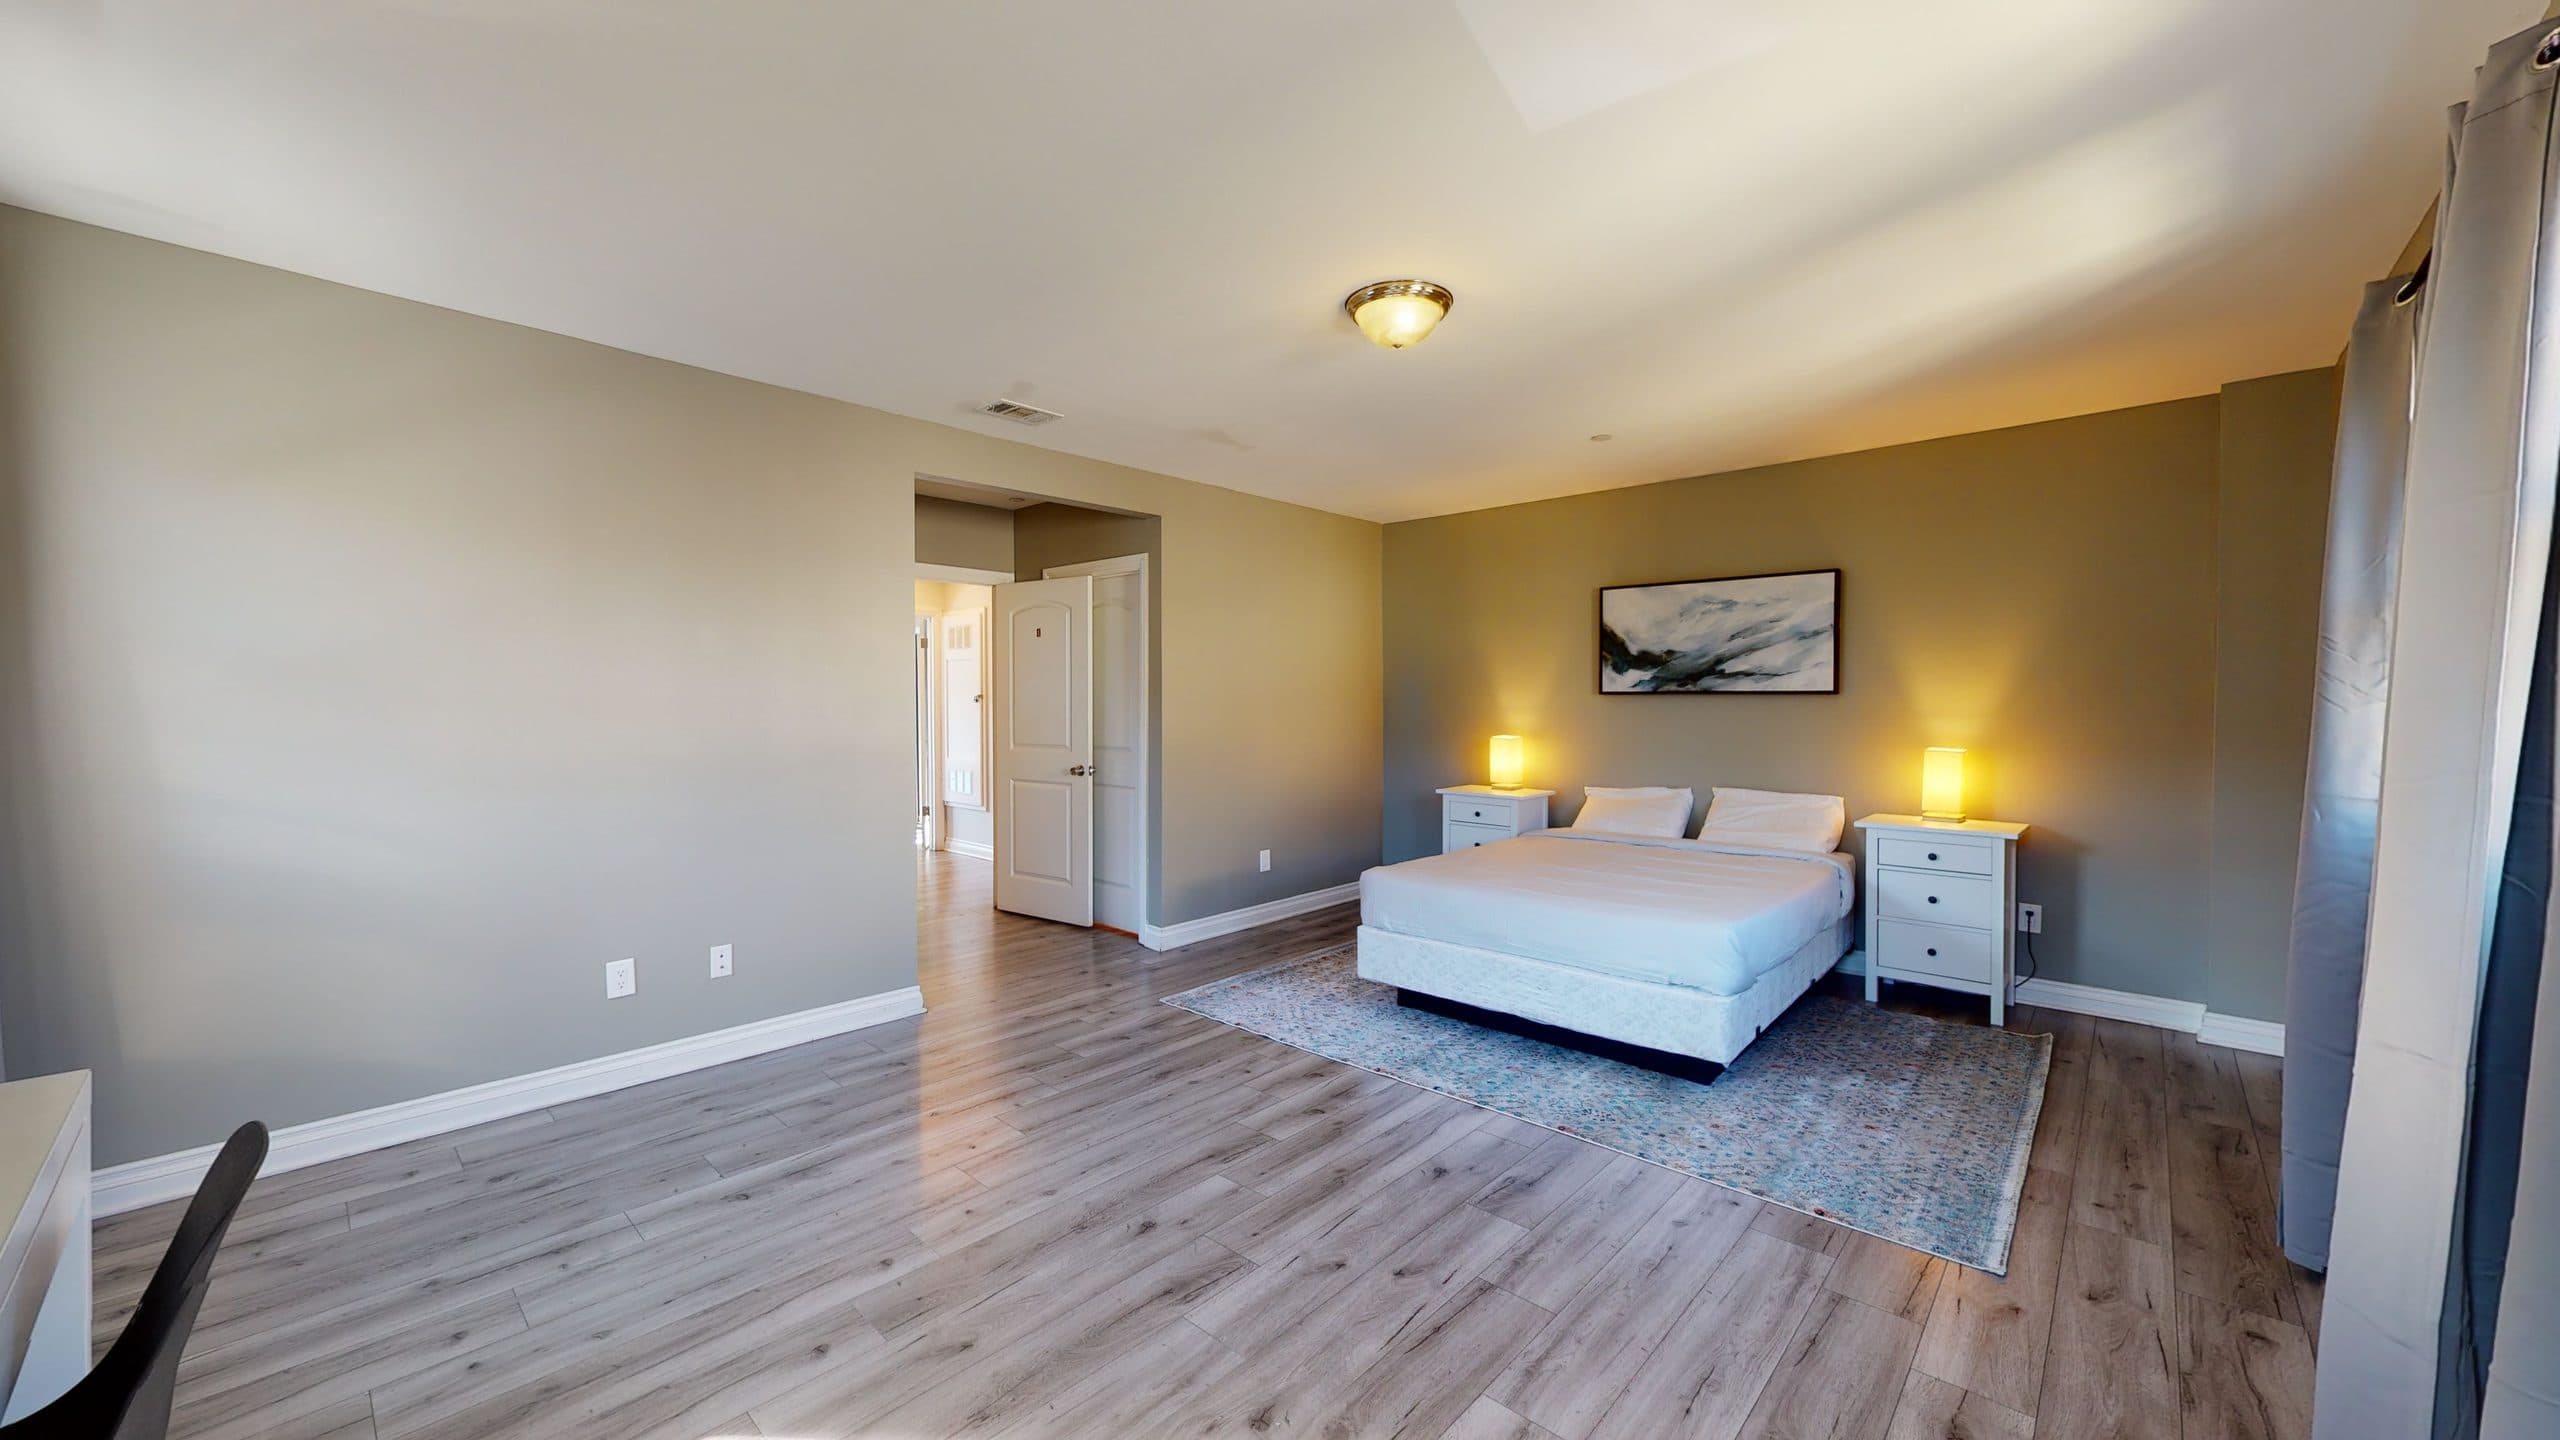 Photo 26 of #2445: Queen Bedroom A (Furnished only) at June Homes